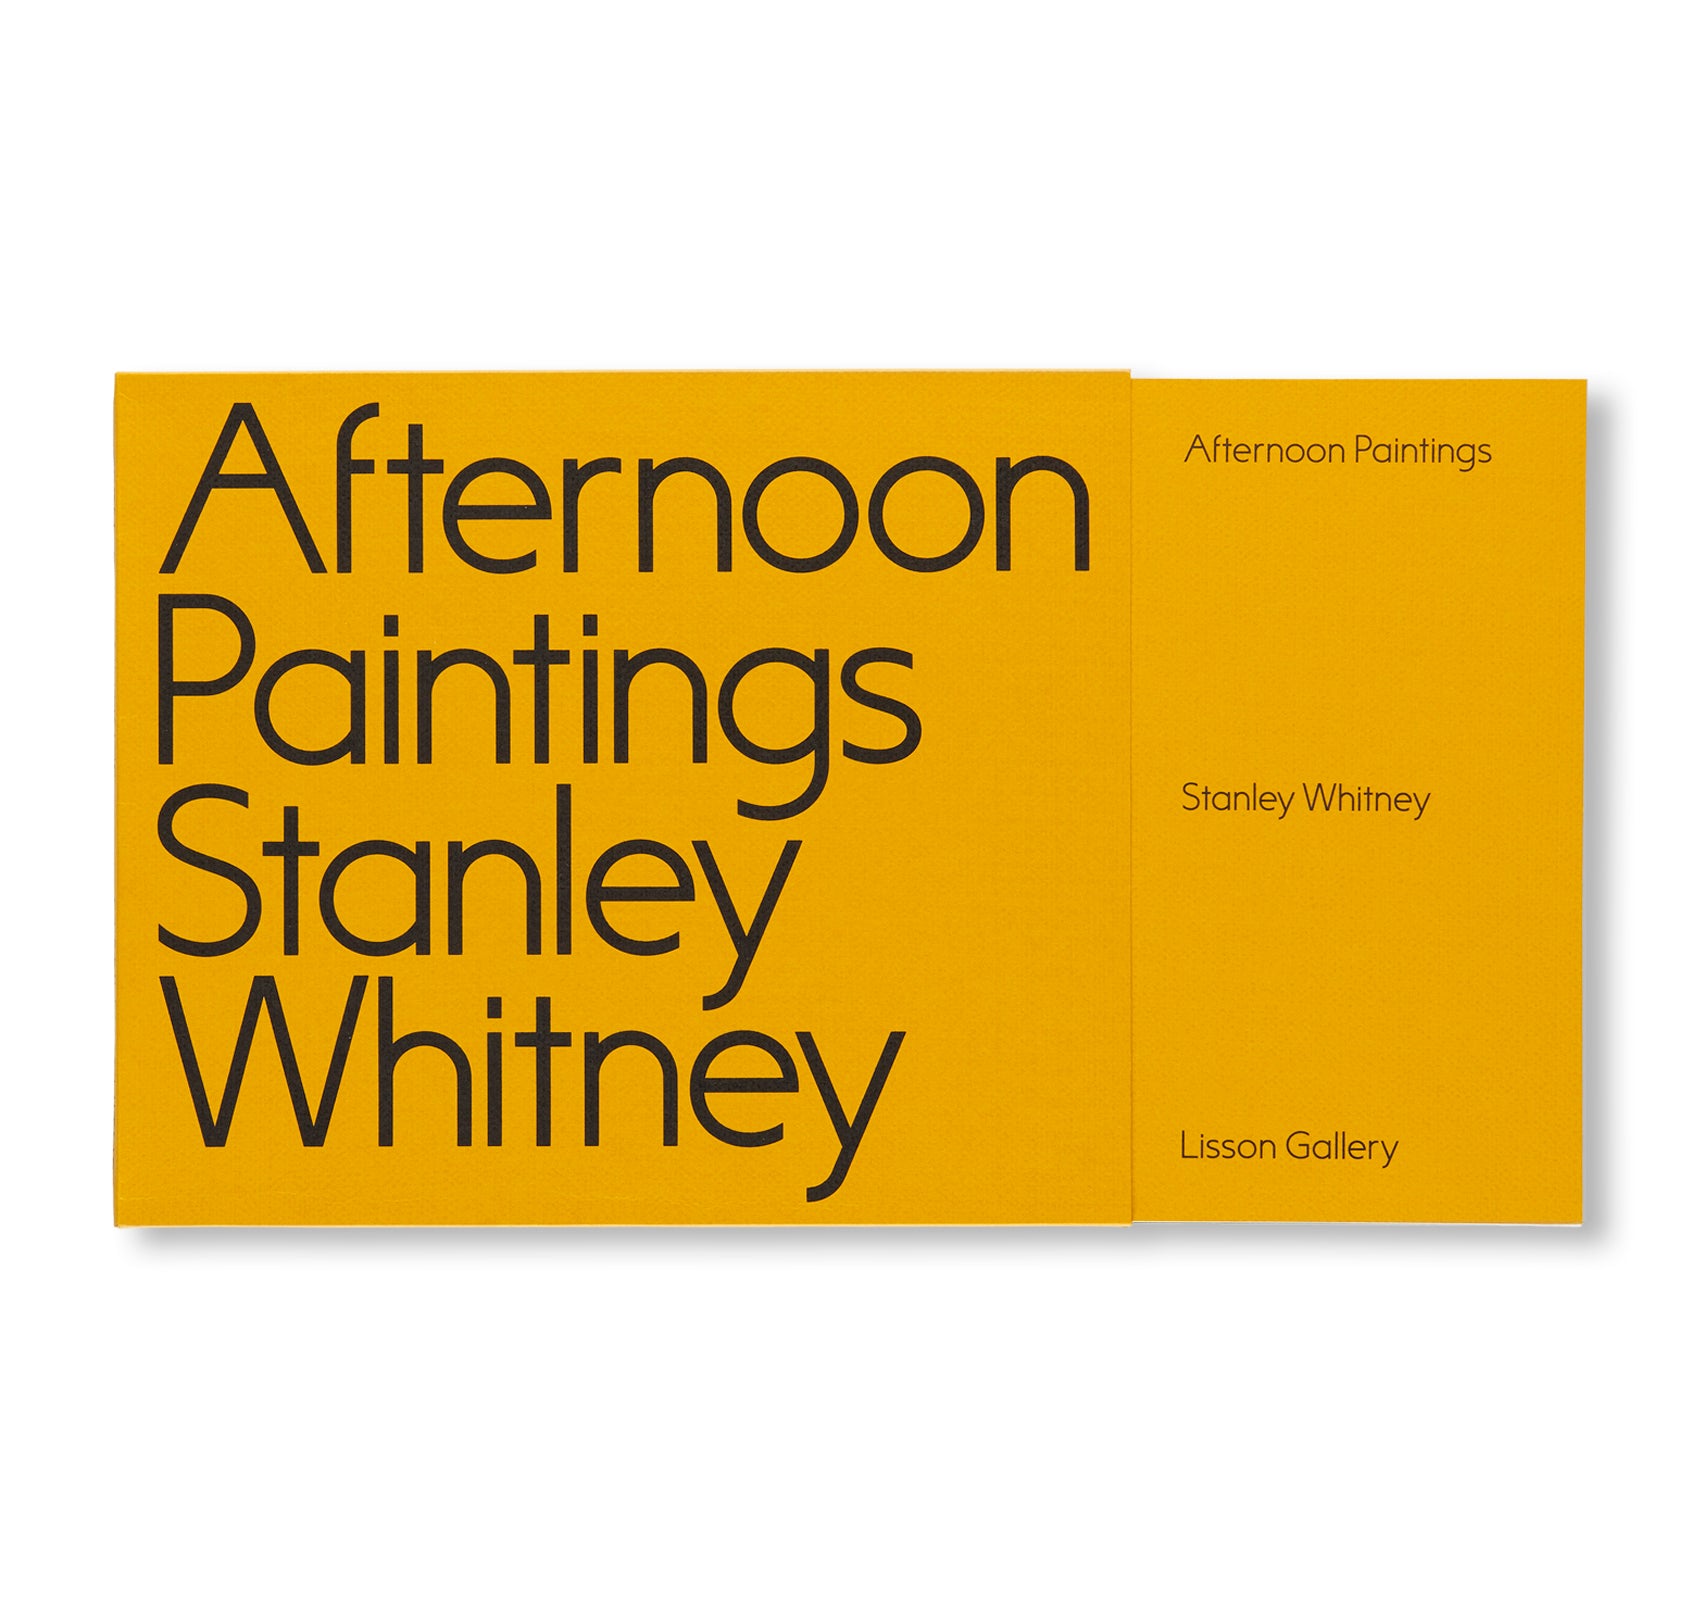 AFTERNOON PAINTINGS by Stanley Whitney